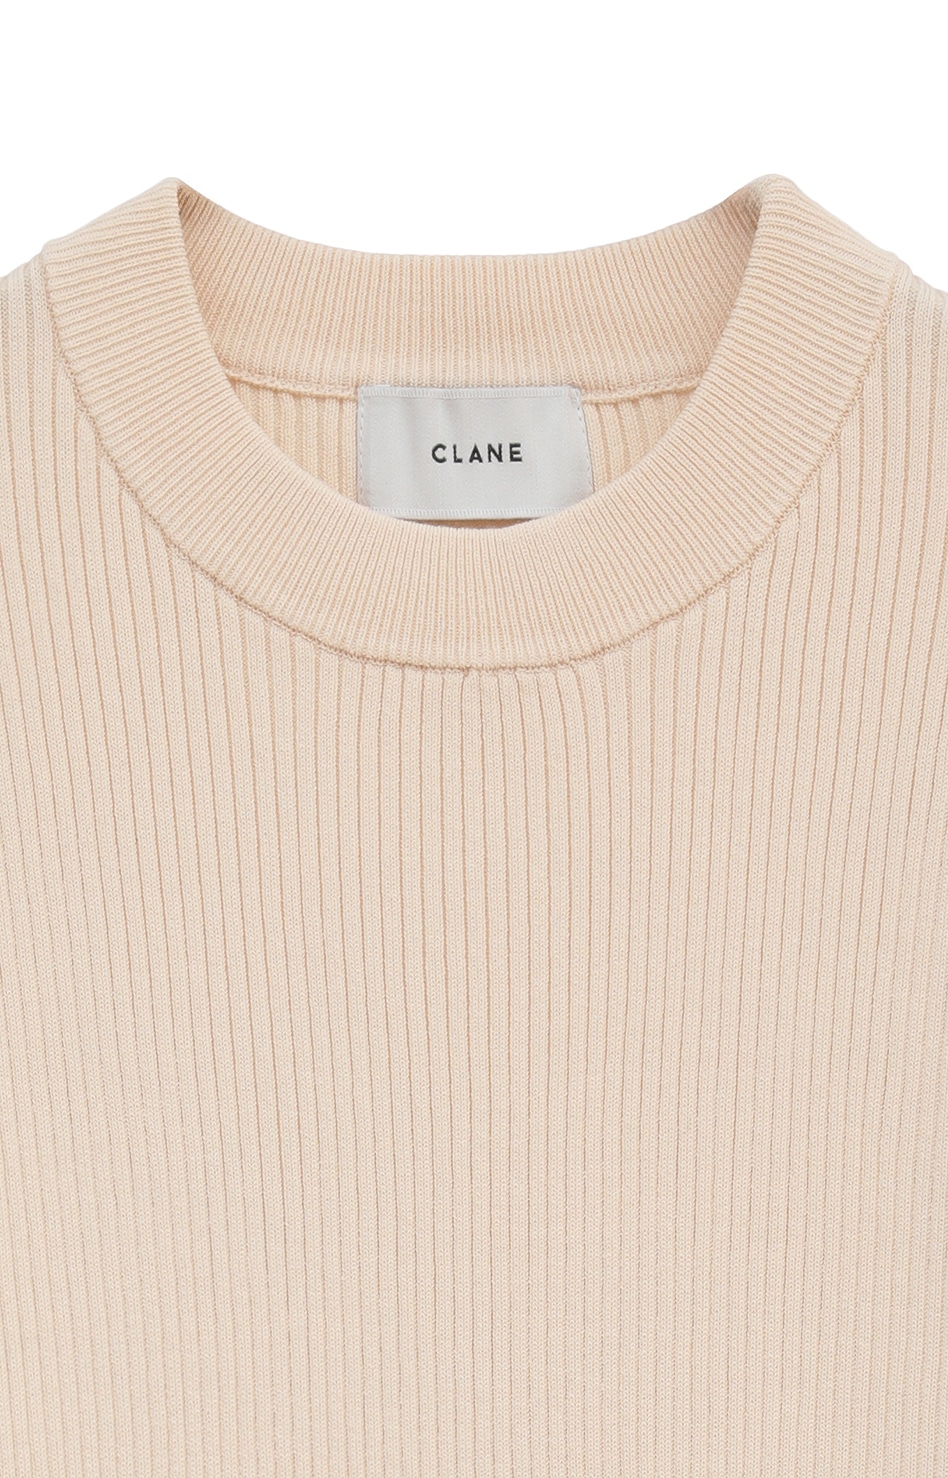 H/N HALF SLEEVE RIB KNIT TOPS｜TOPS(トップス)｜CLANE OFFICIAL 